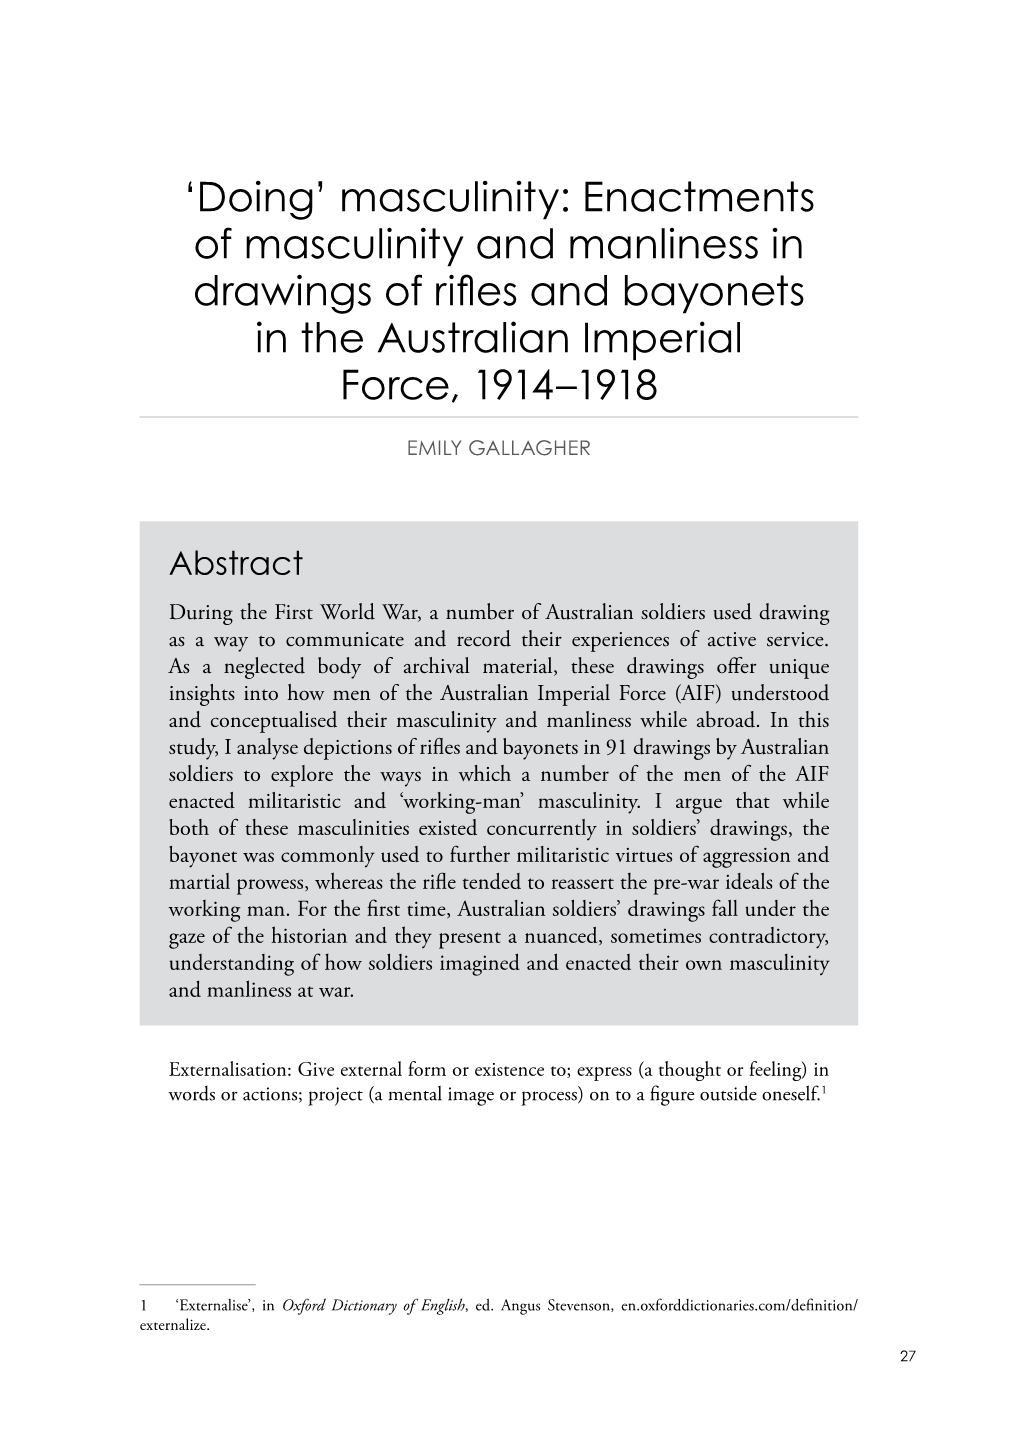 Masculinity: Enactments of Masculinity and Manliness in Drawings of Rifles and Bayonets in the Australian Imperial Force, 1914 –1918